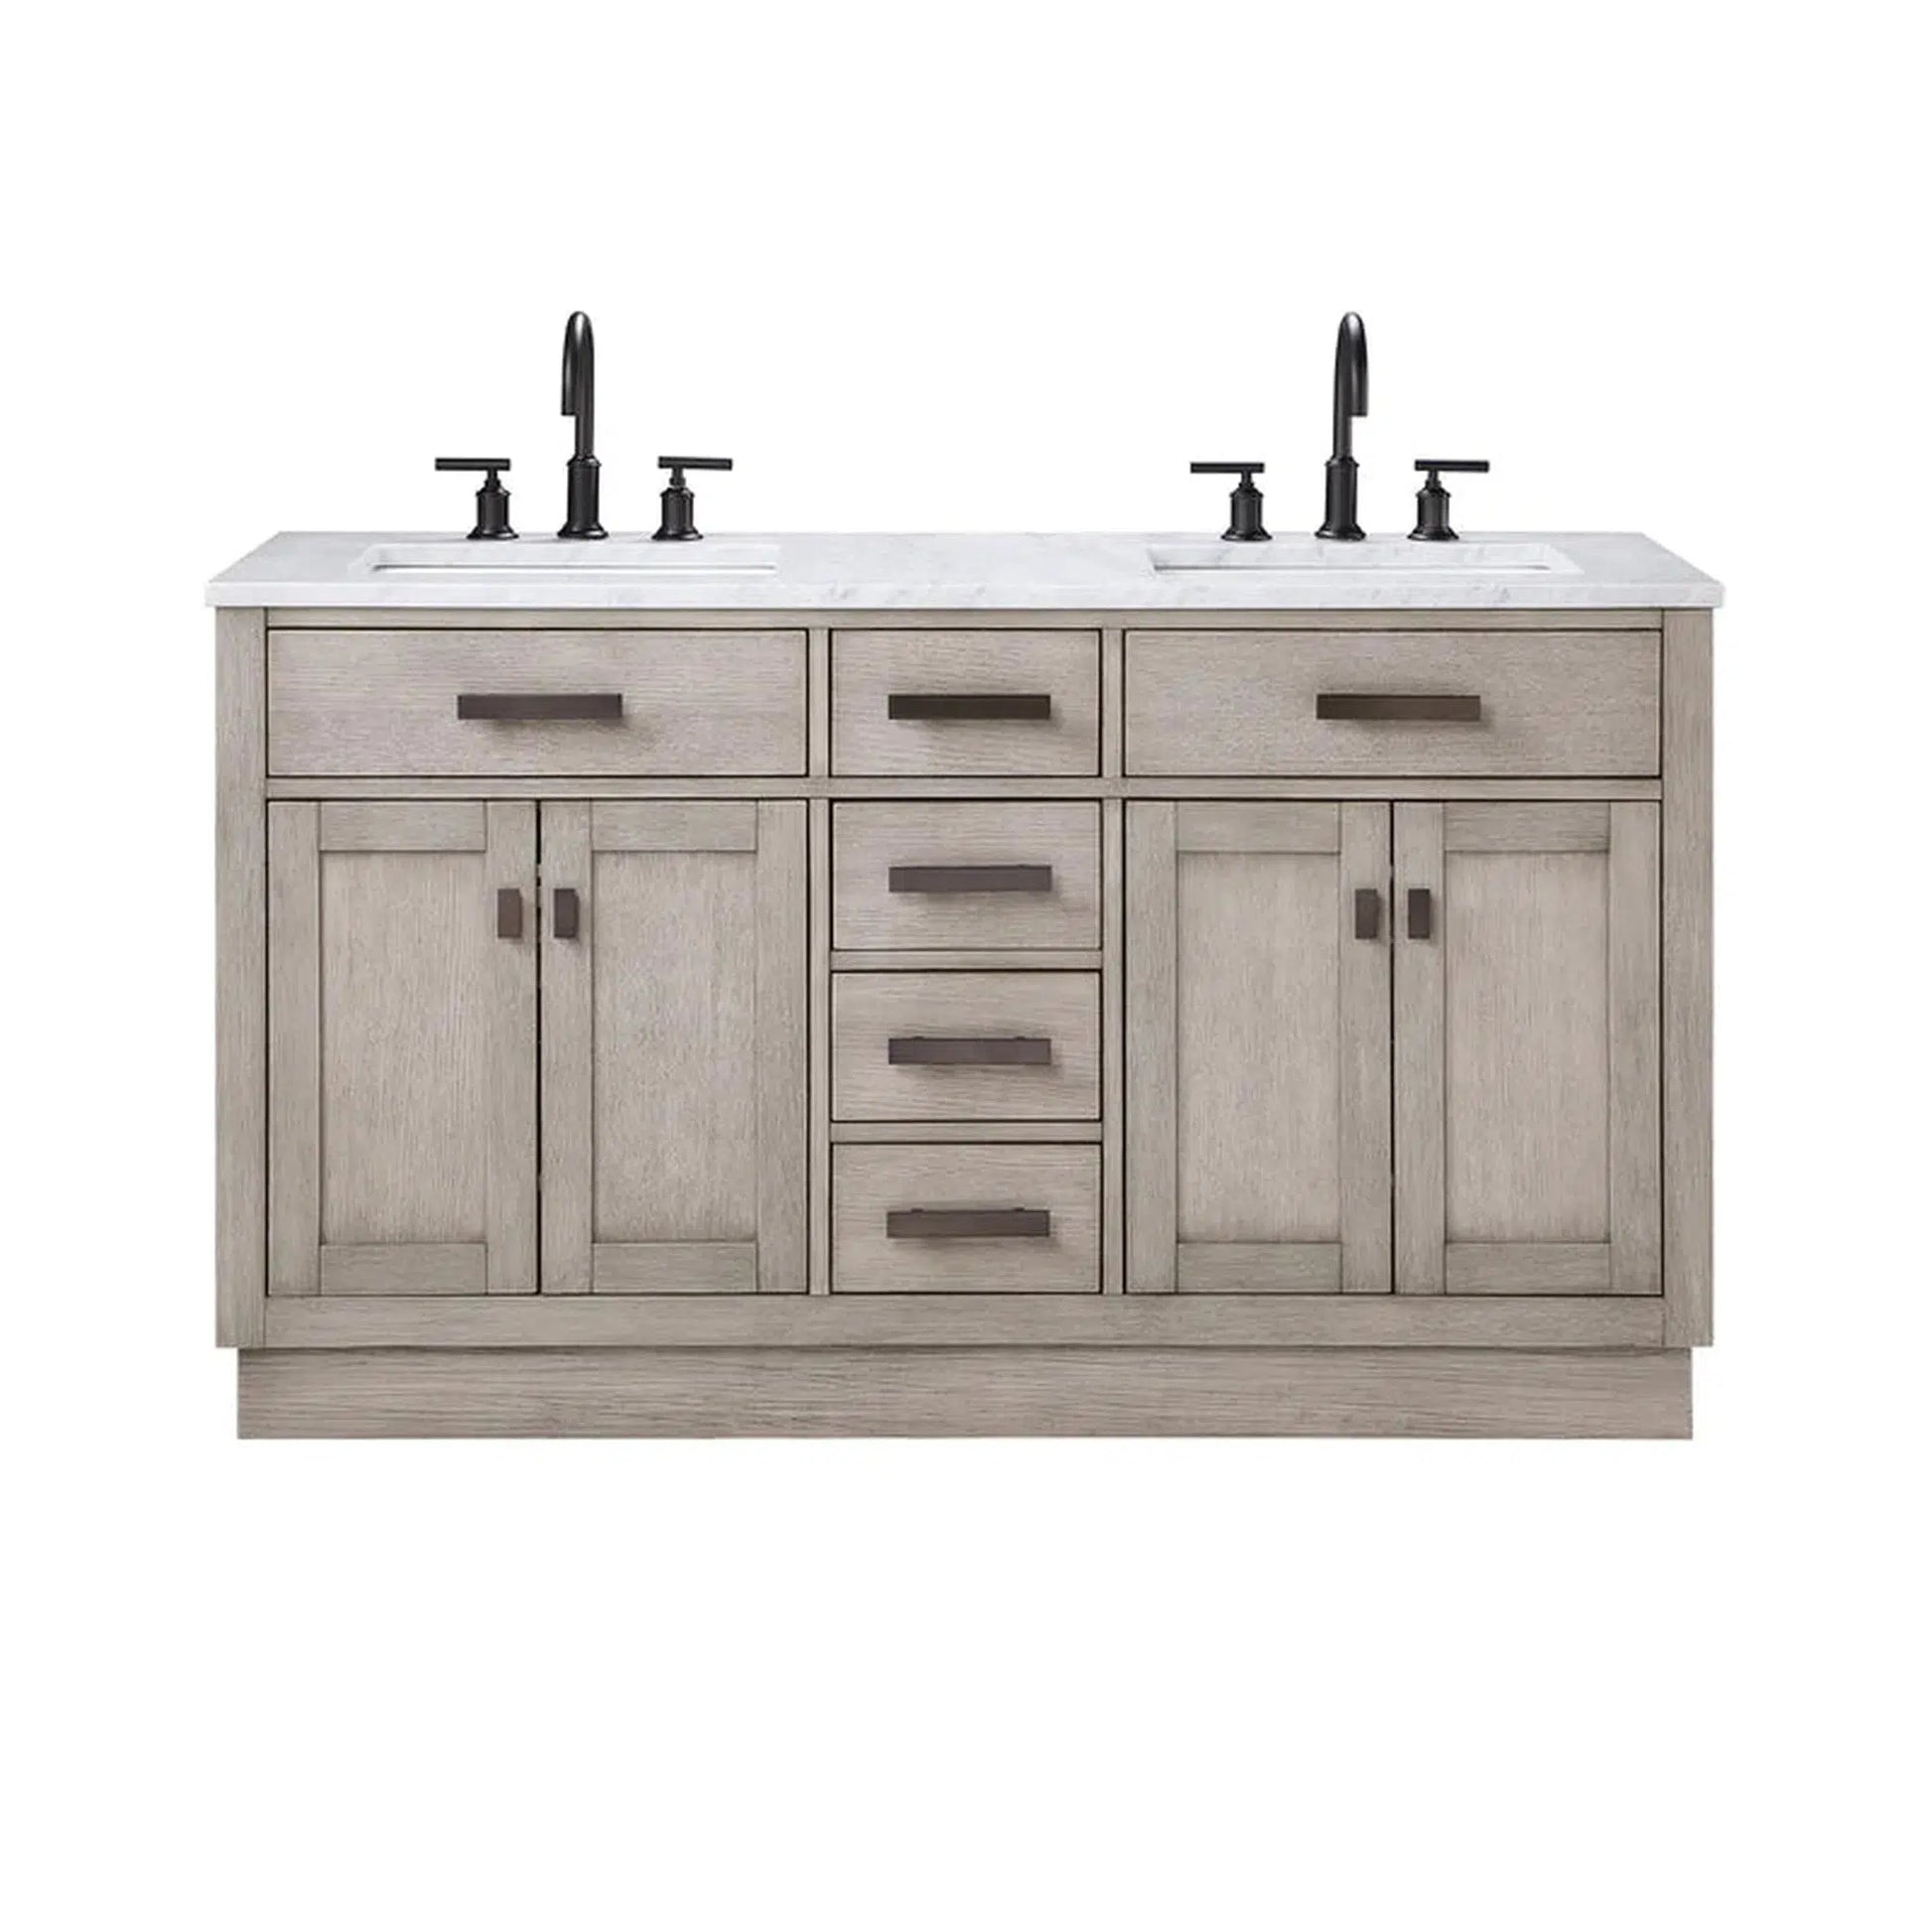 Water Creation Chestnut 60" Double Sink Carrara White Marble Countertop Vanity In Grey Oak with Mirrors